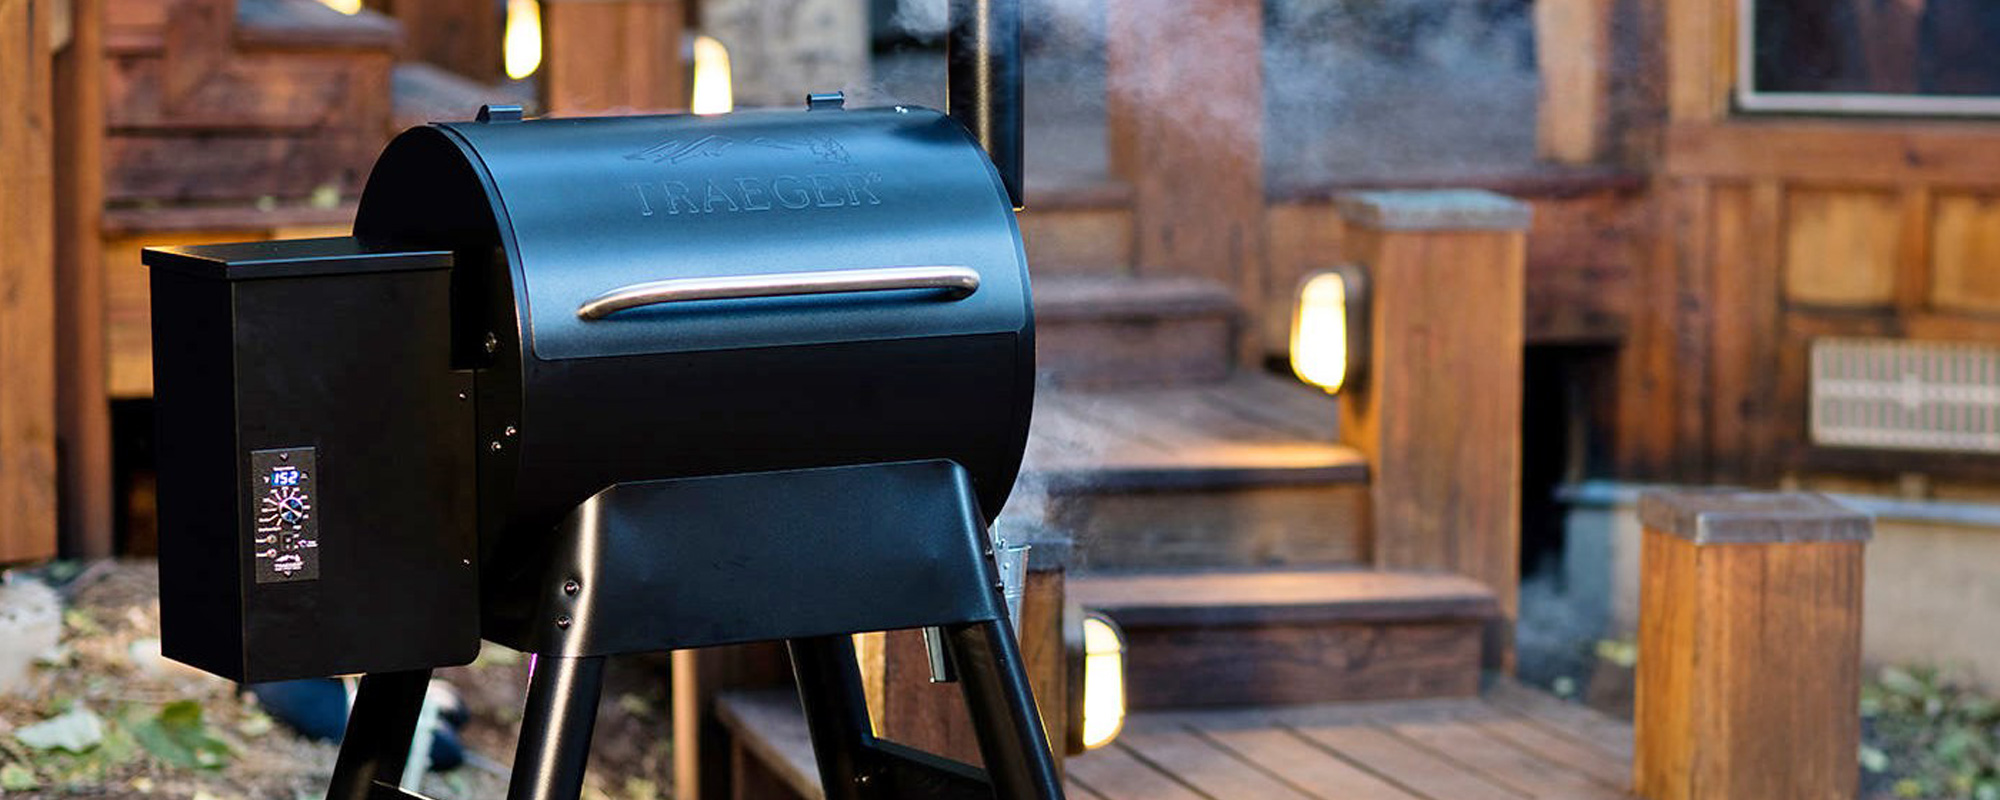 Featured image for “Traeger Pellet Grills To Expand Salt Lake City Headquarters”